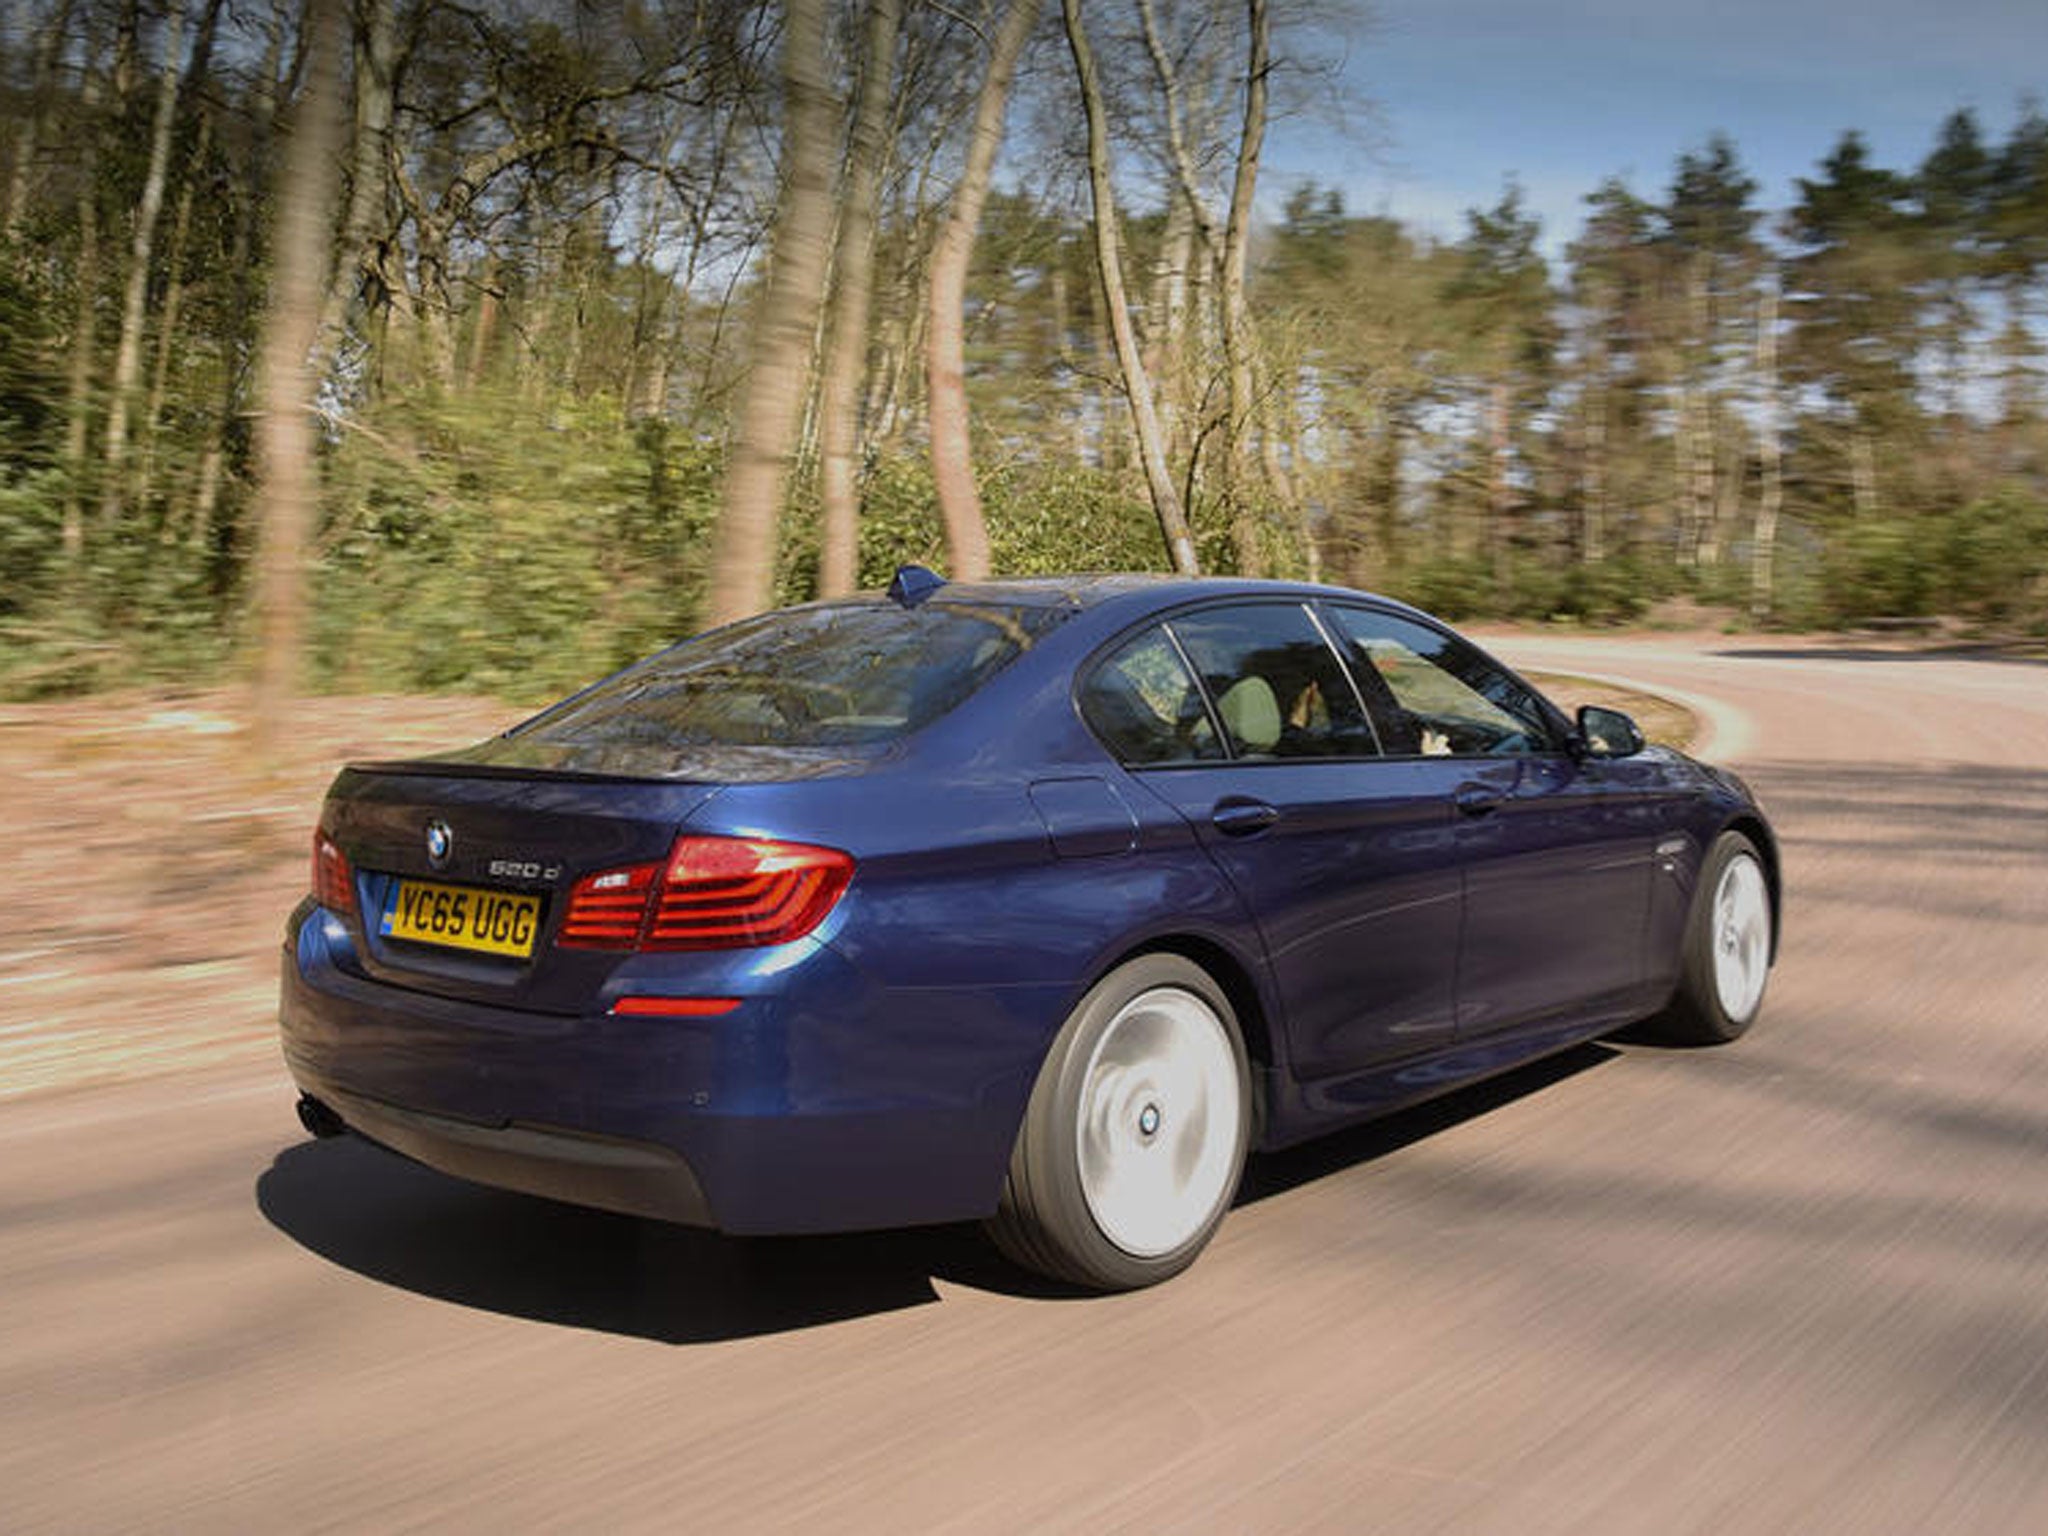 The hugely regarded BMW 5 Series has a challenge on its hands